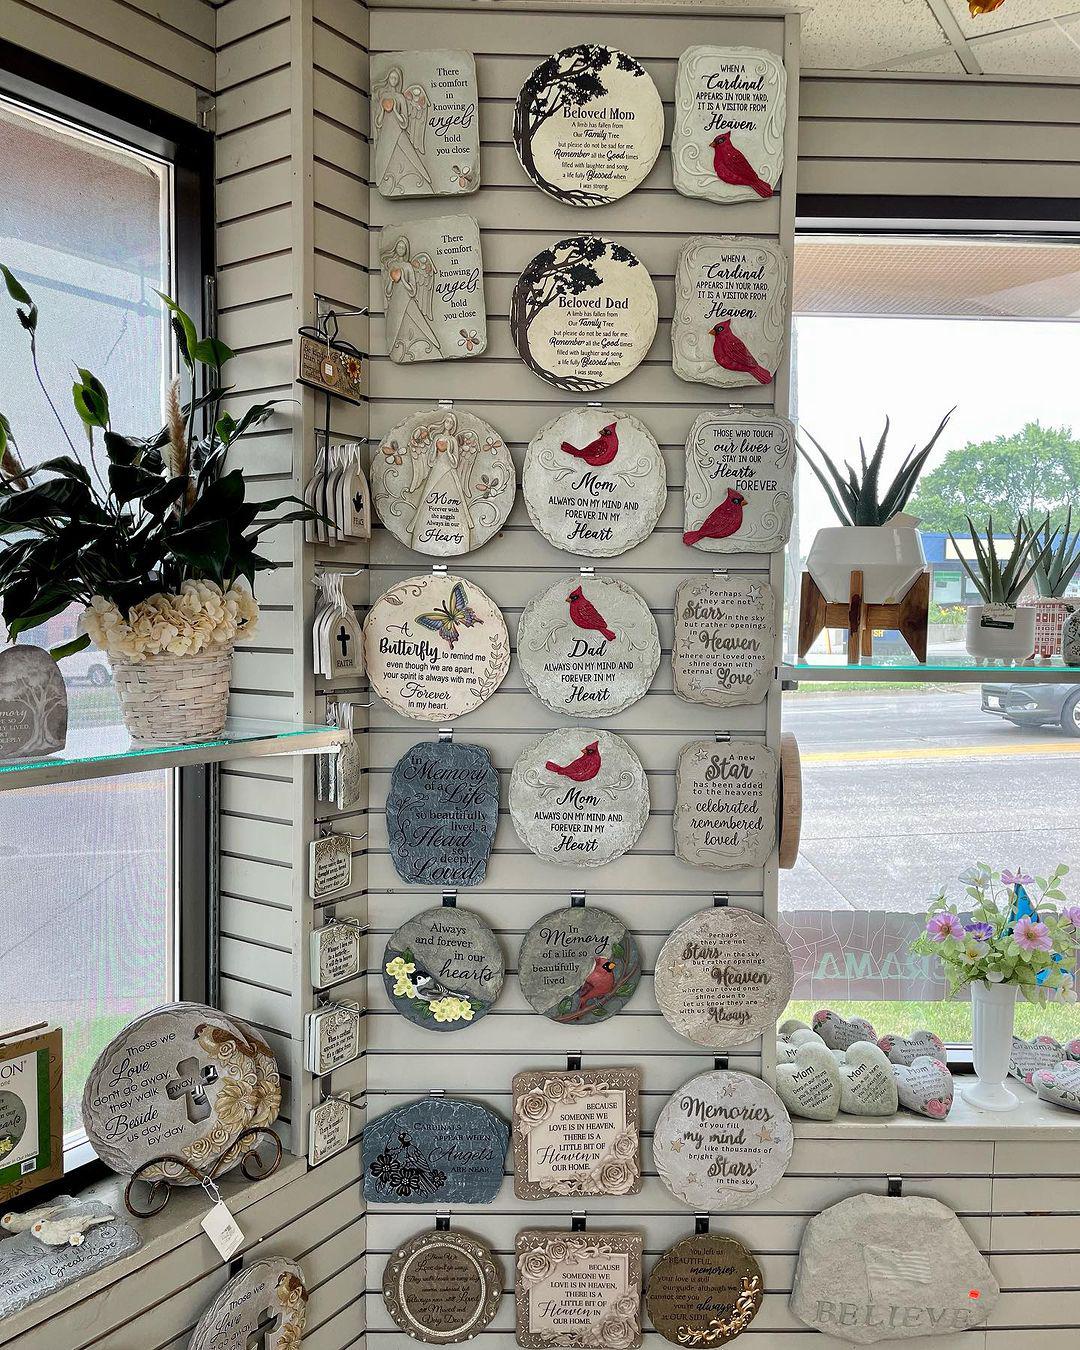 Did you know we offer a full line of Sympathy Memorial stones and gifts? Stop in and let us help you pick something out.